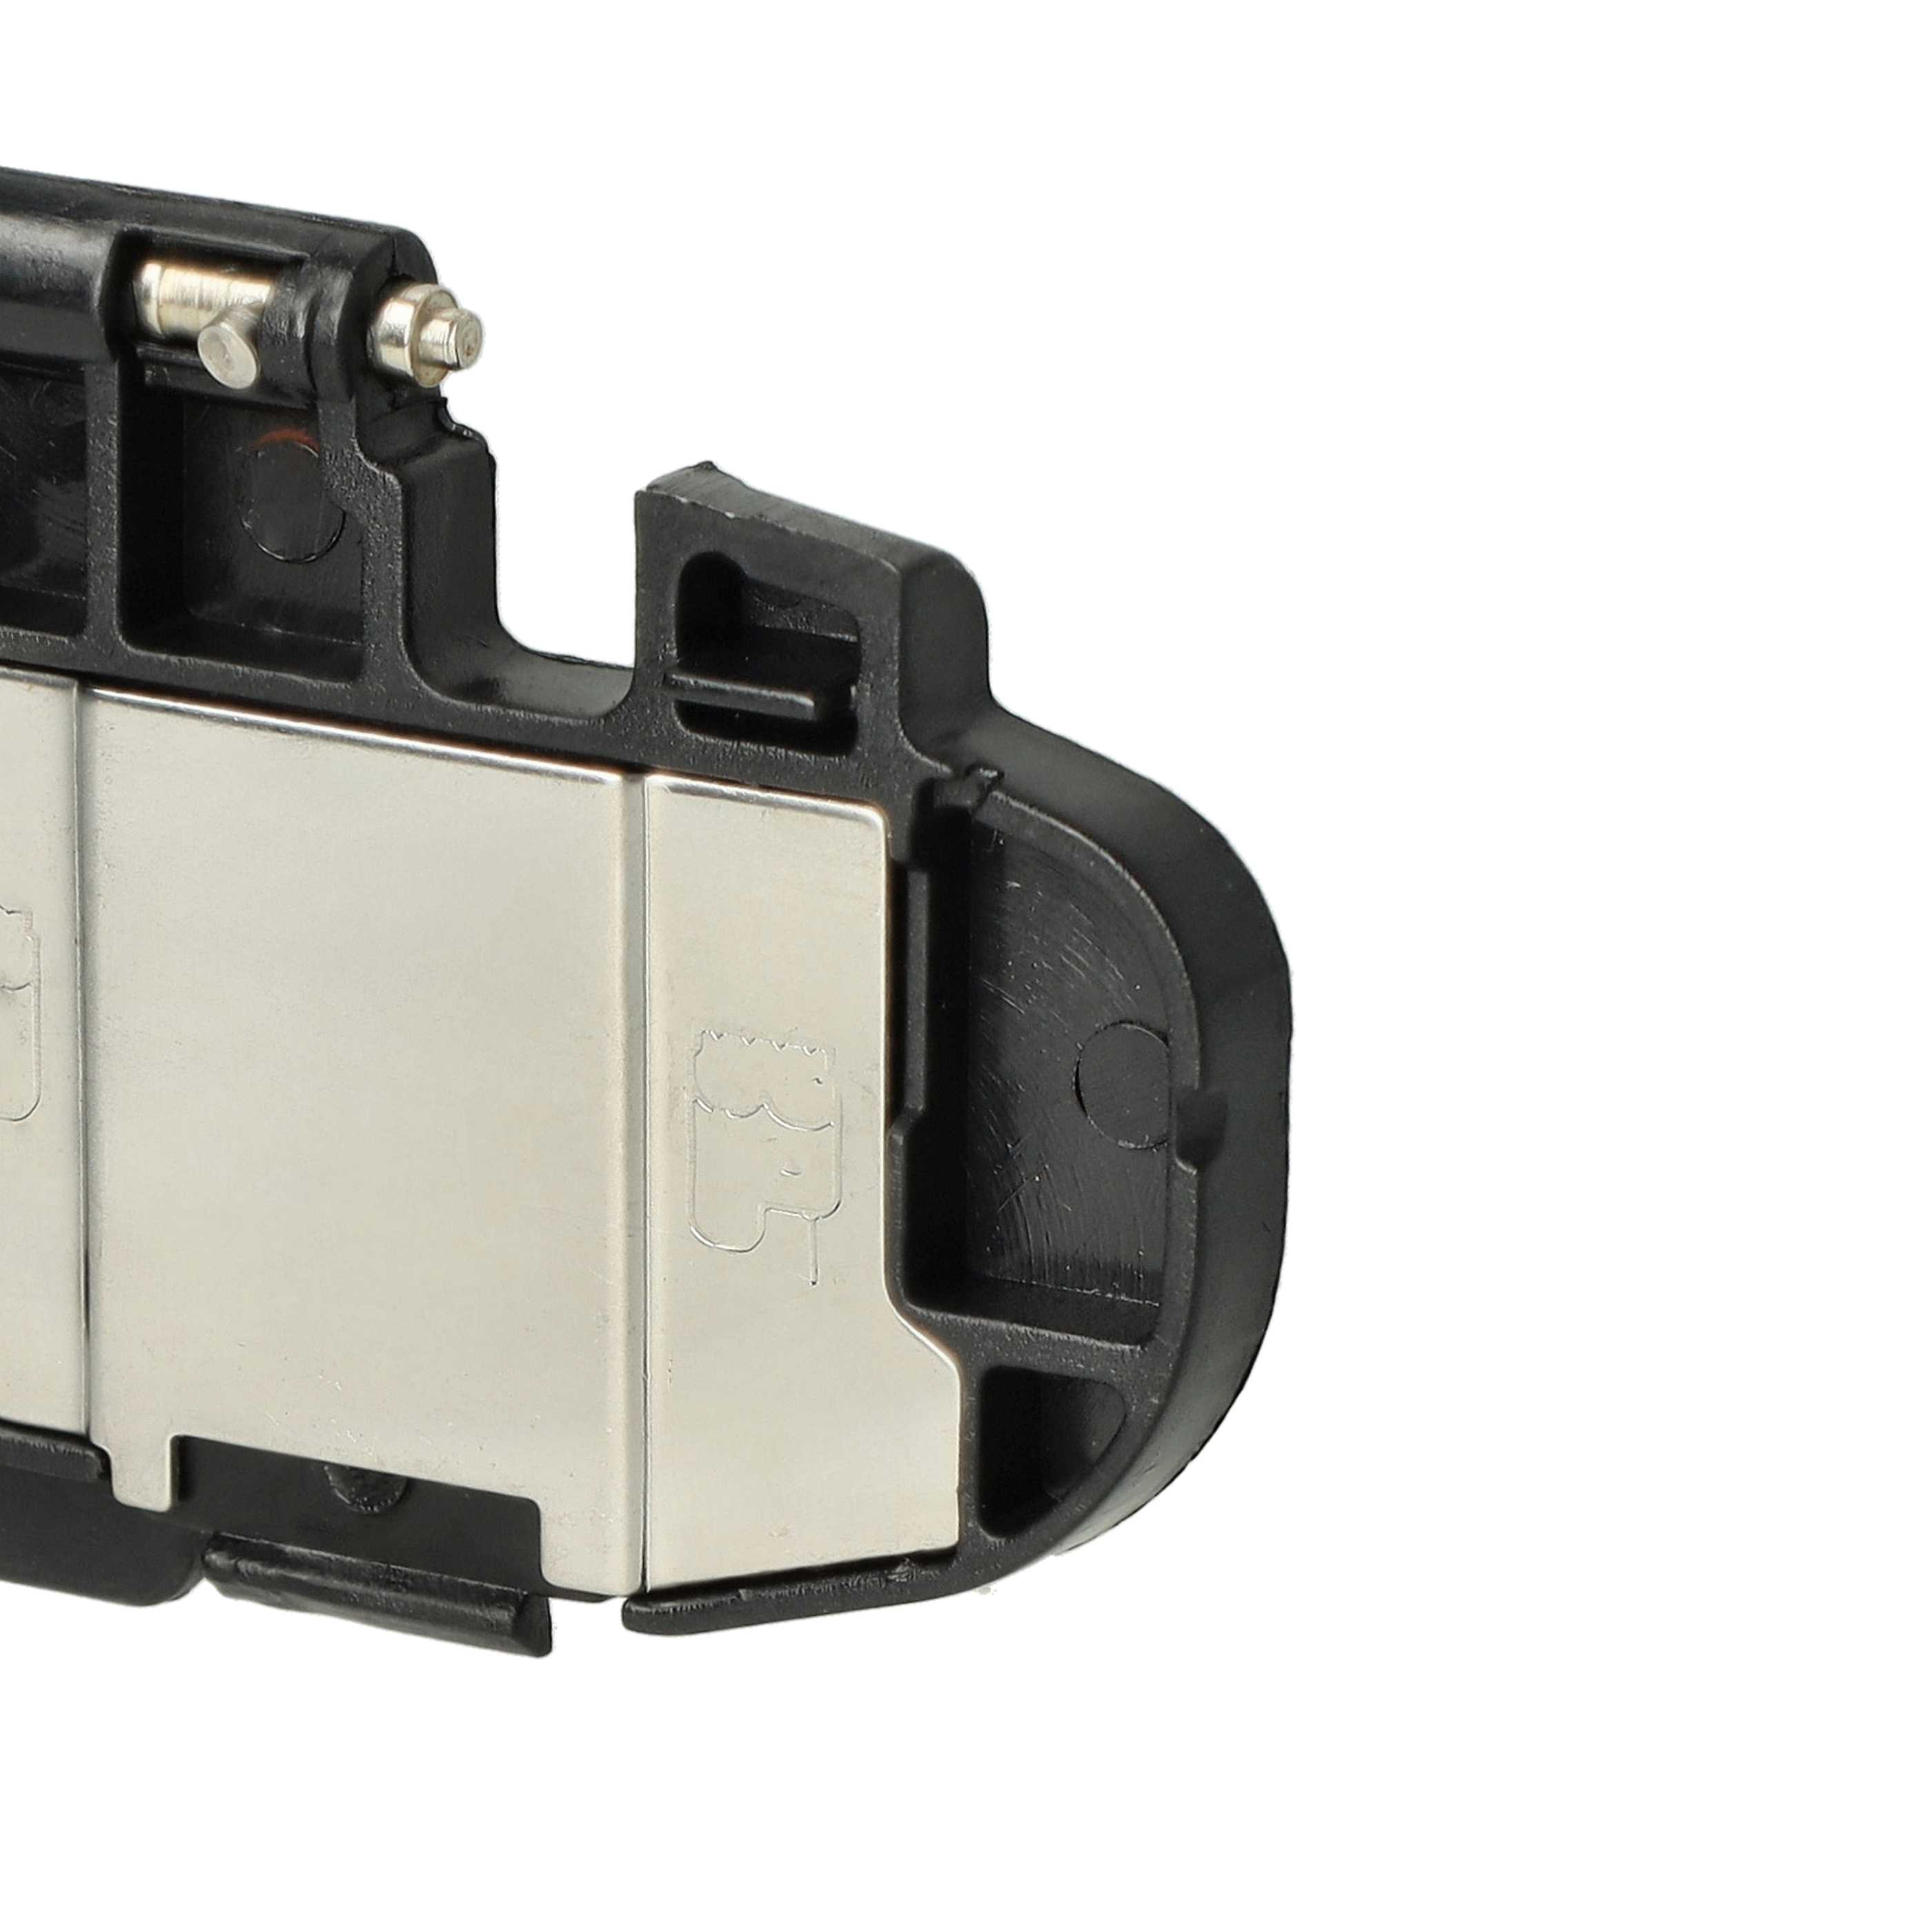 Battery Door Cover suitable for Canon EOS 5D Camera, Battery Grip